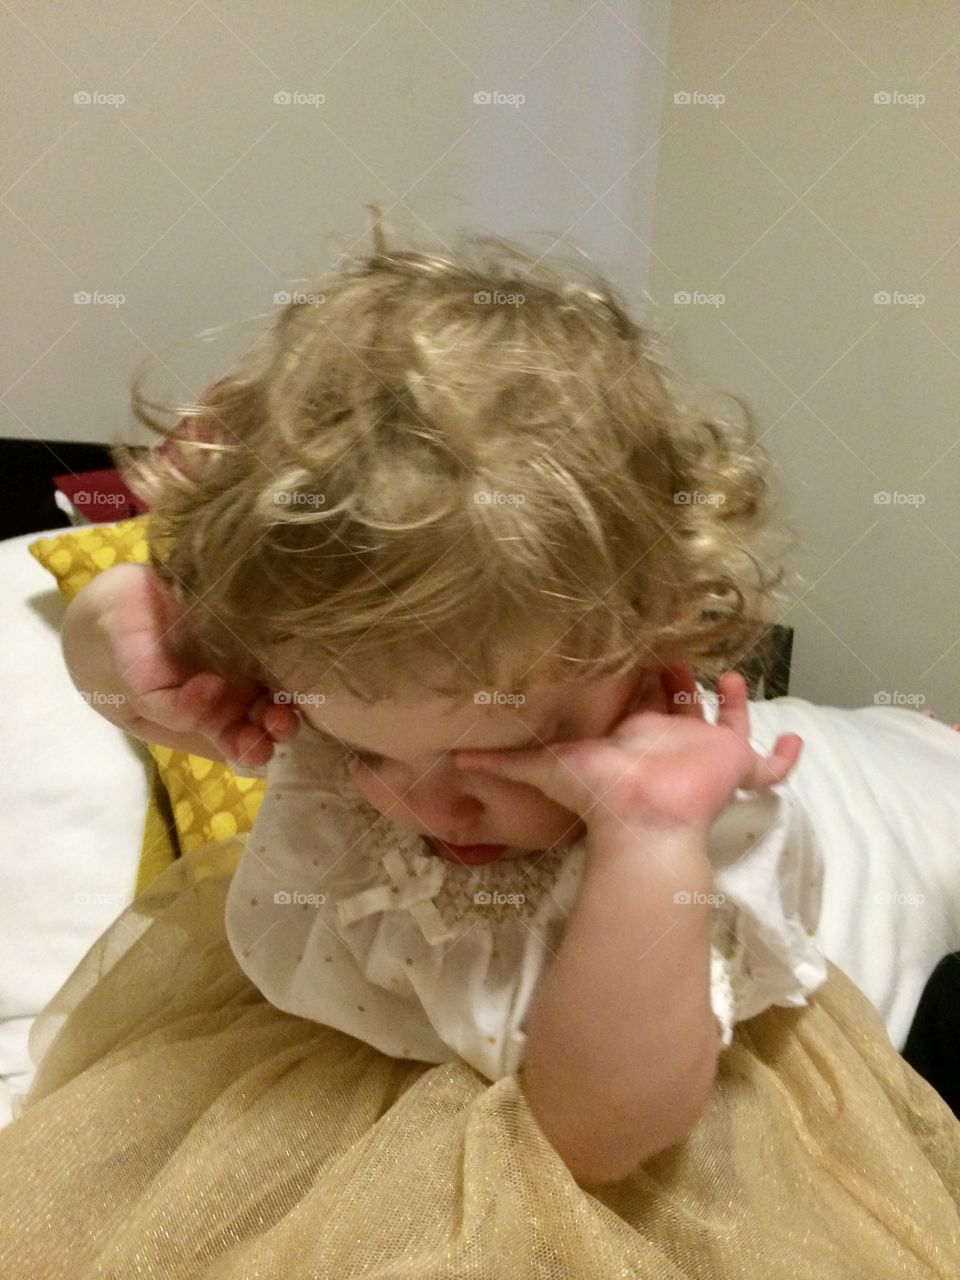 Curly blonde baby girl on bed waking up from nap in gold tutu